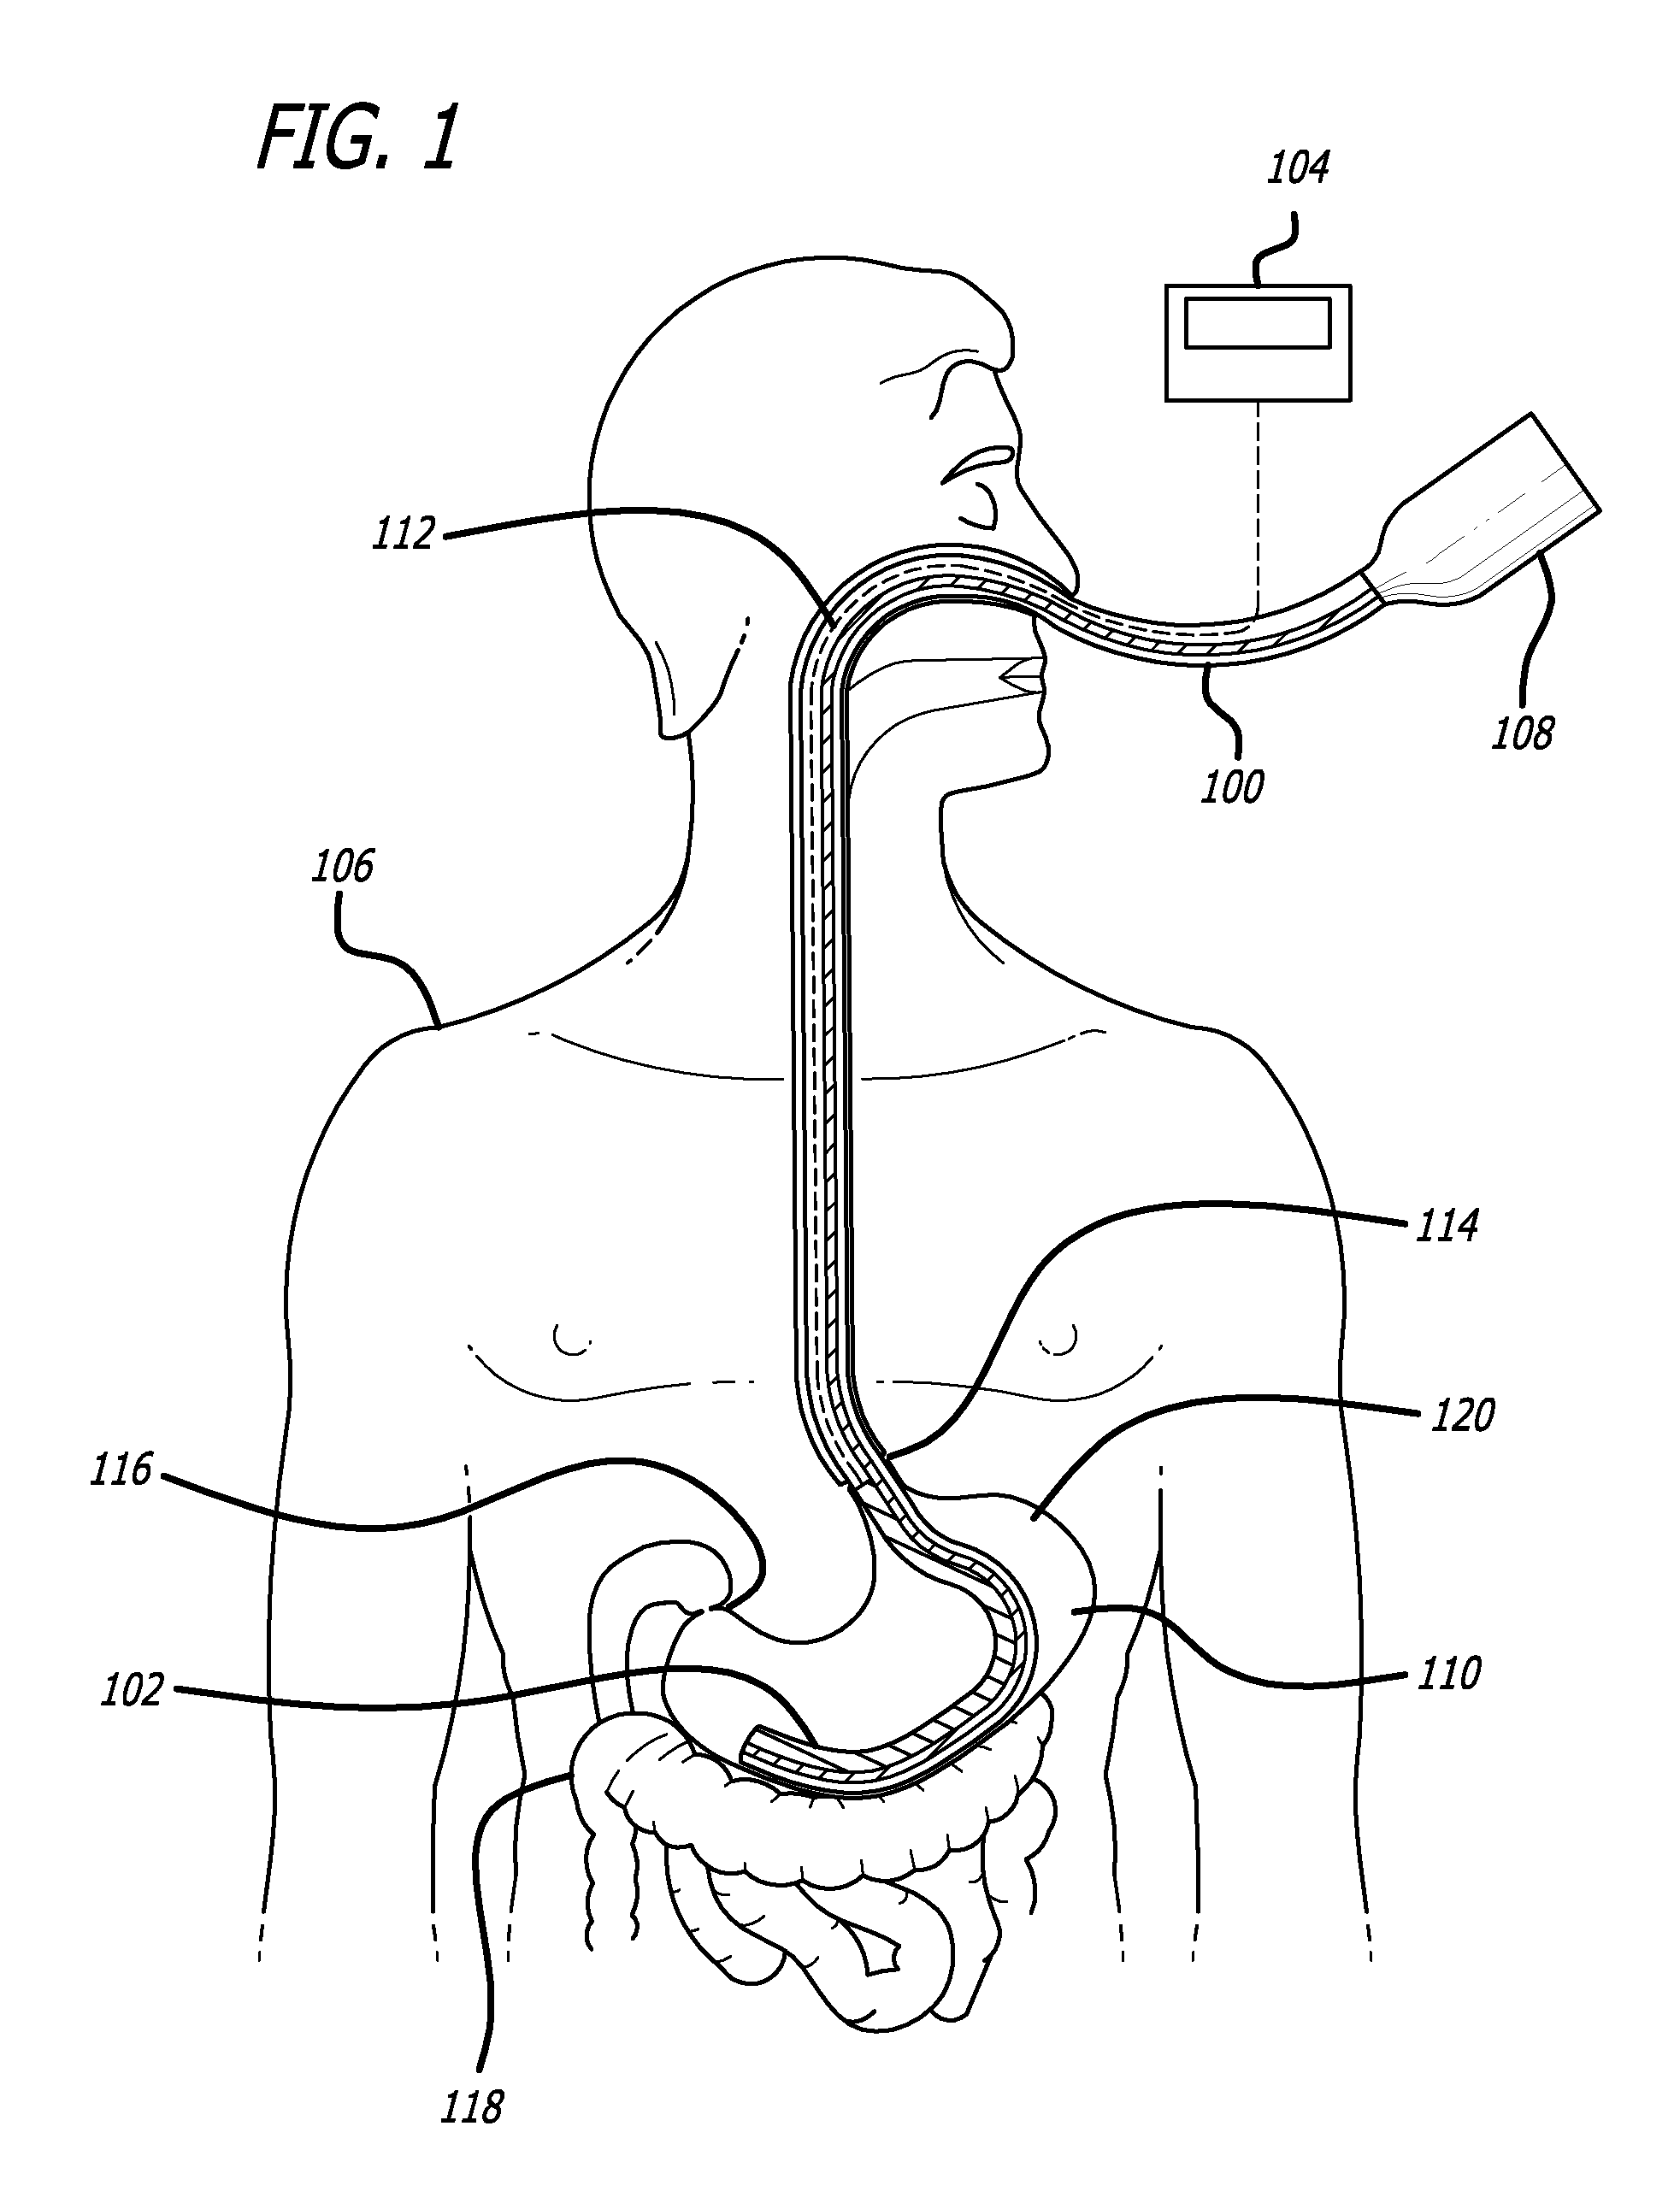 NG tube with gastric volume detection